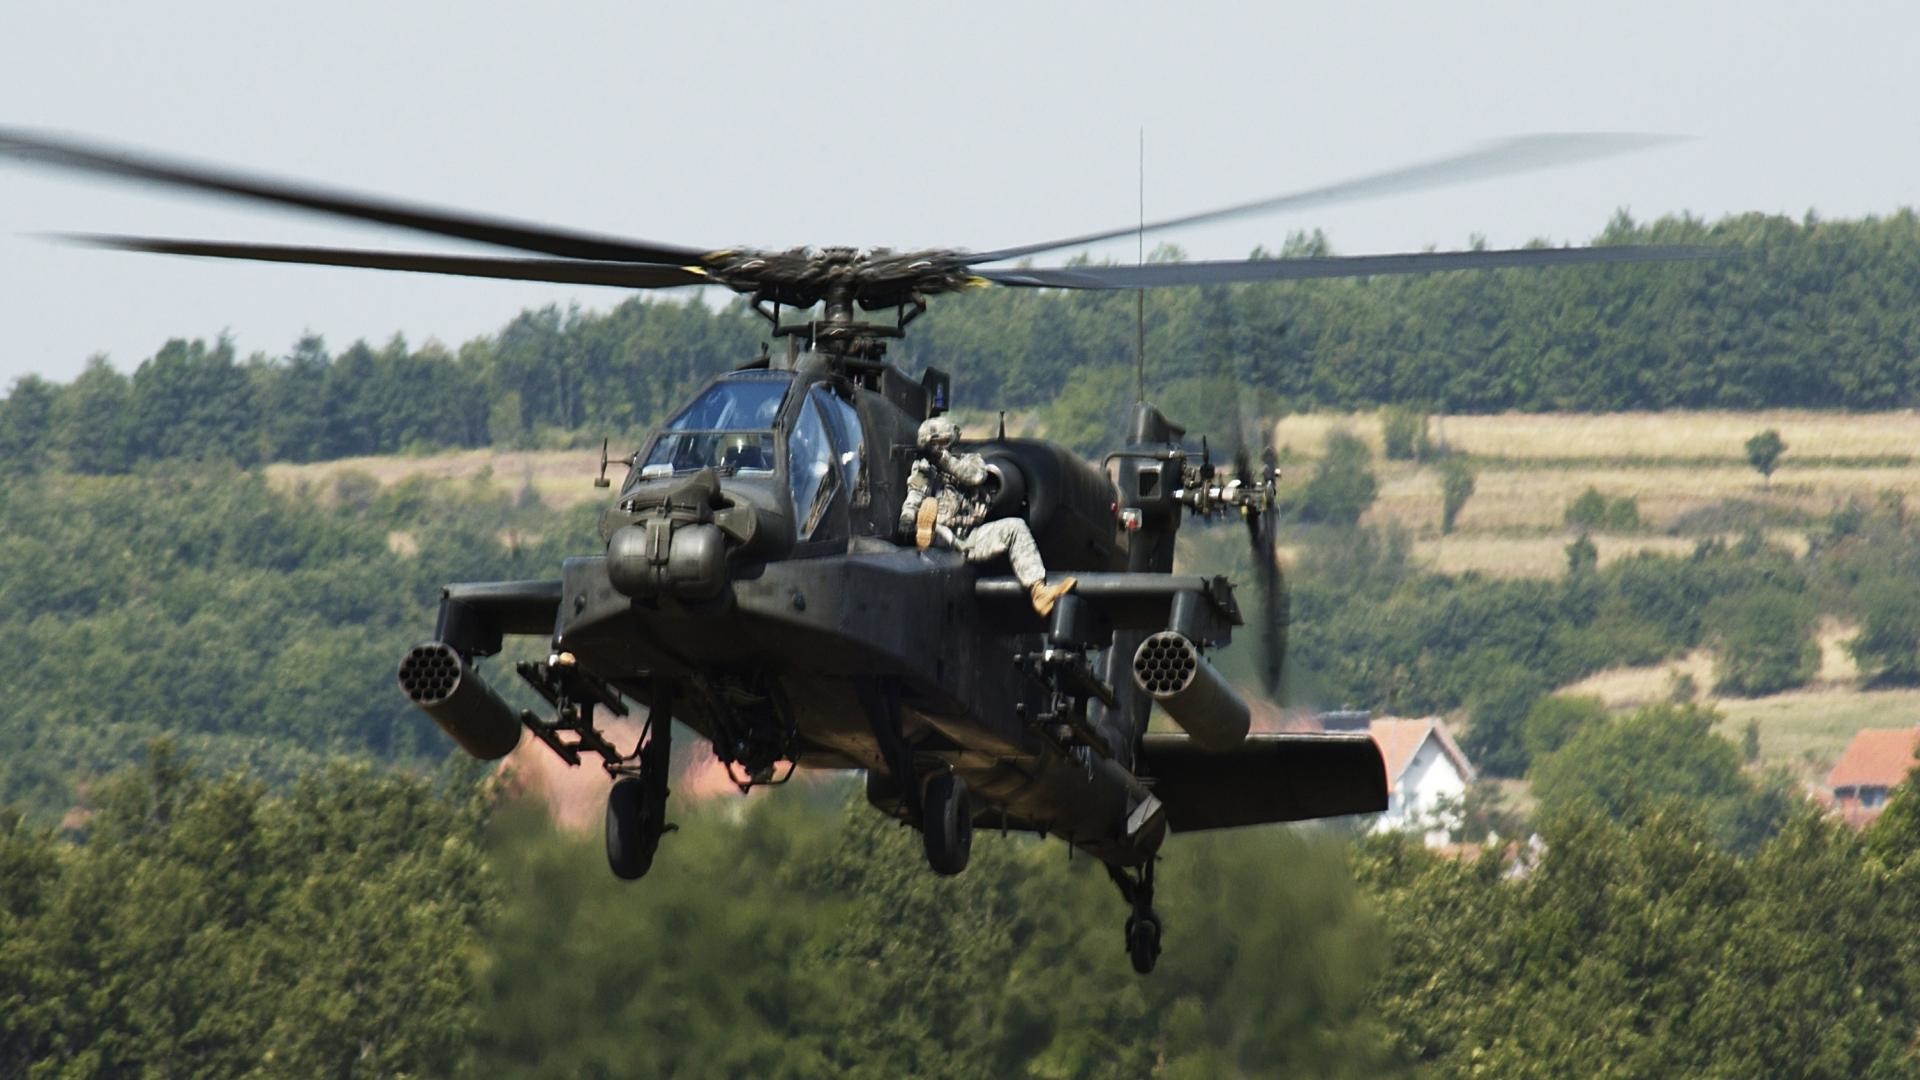 1920x1080 Ah 64d apache army helicopter